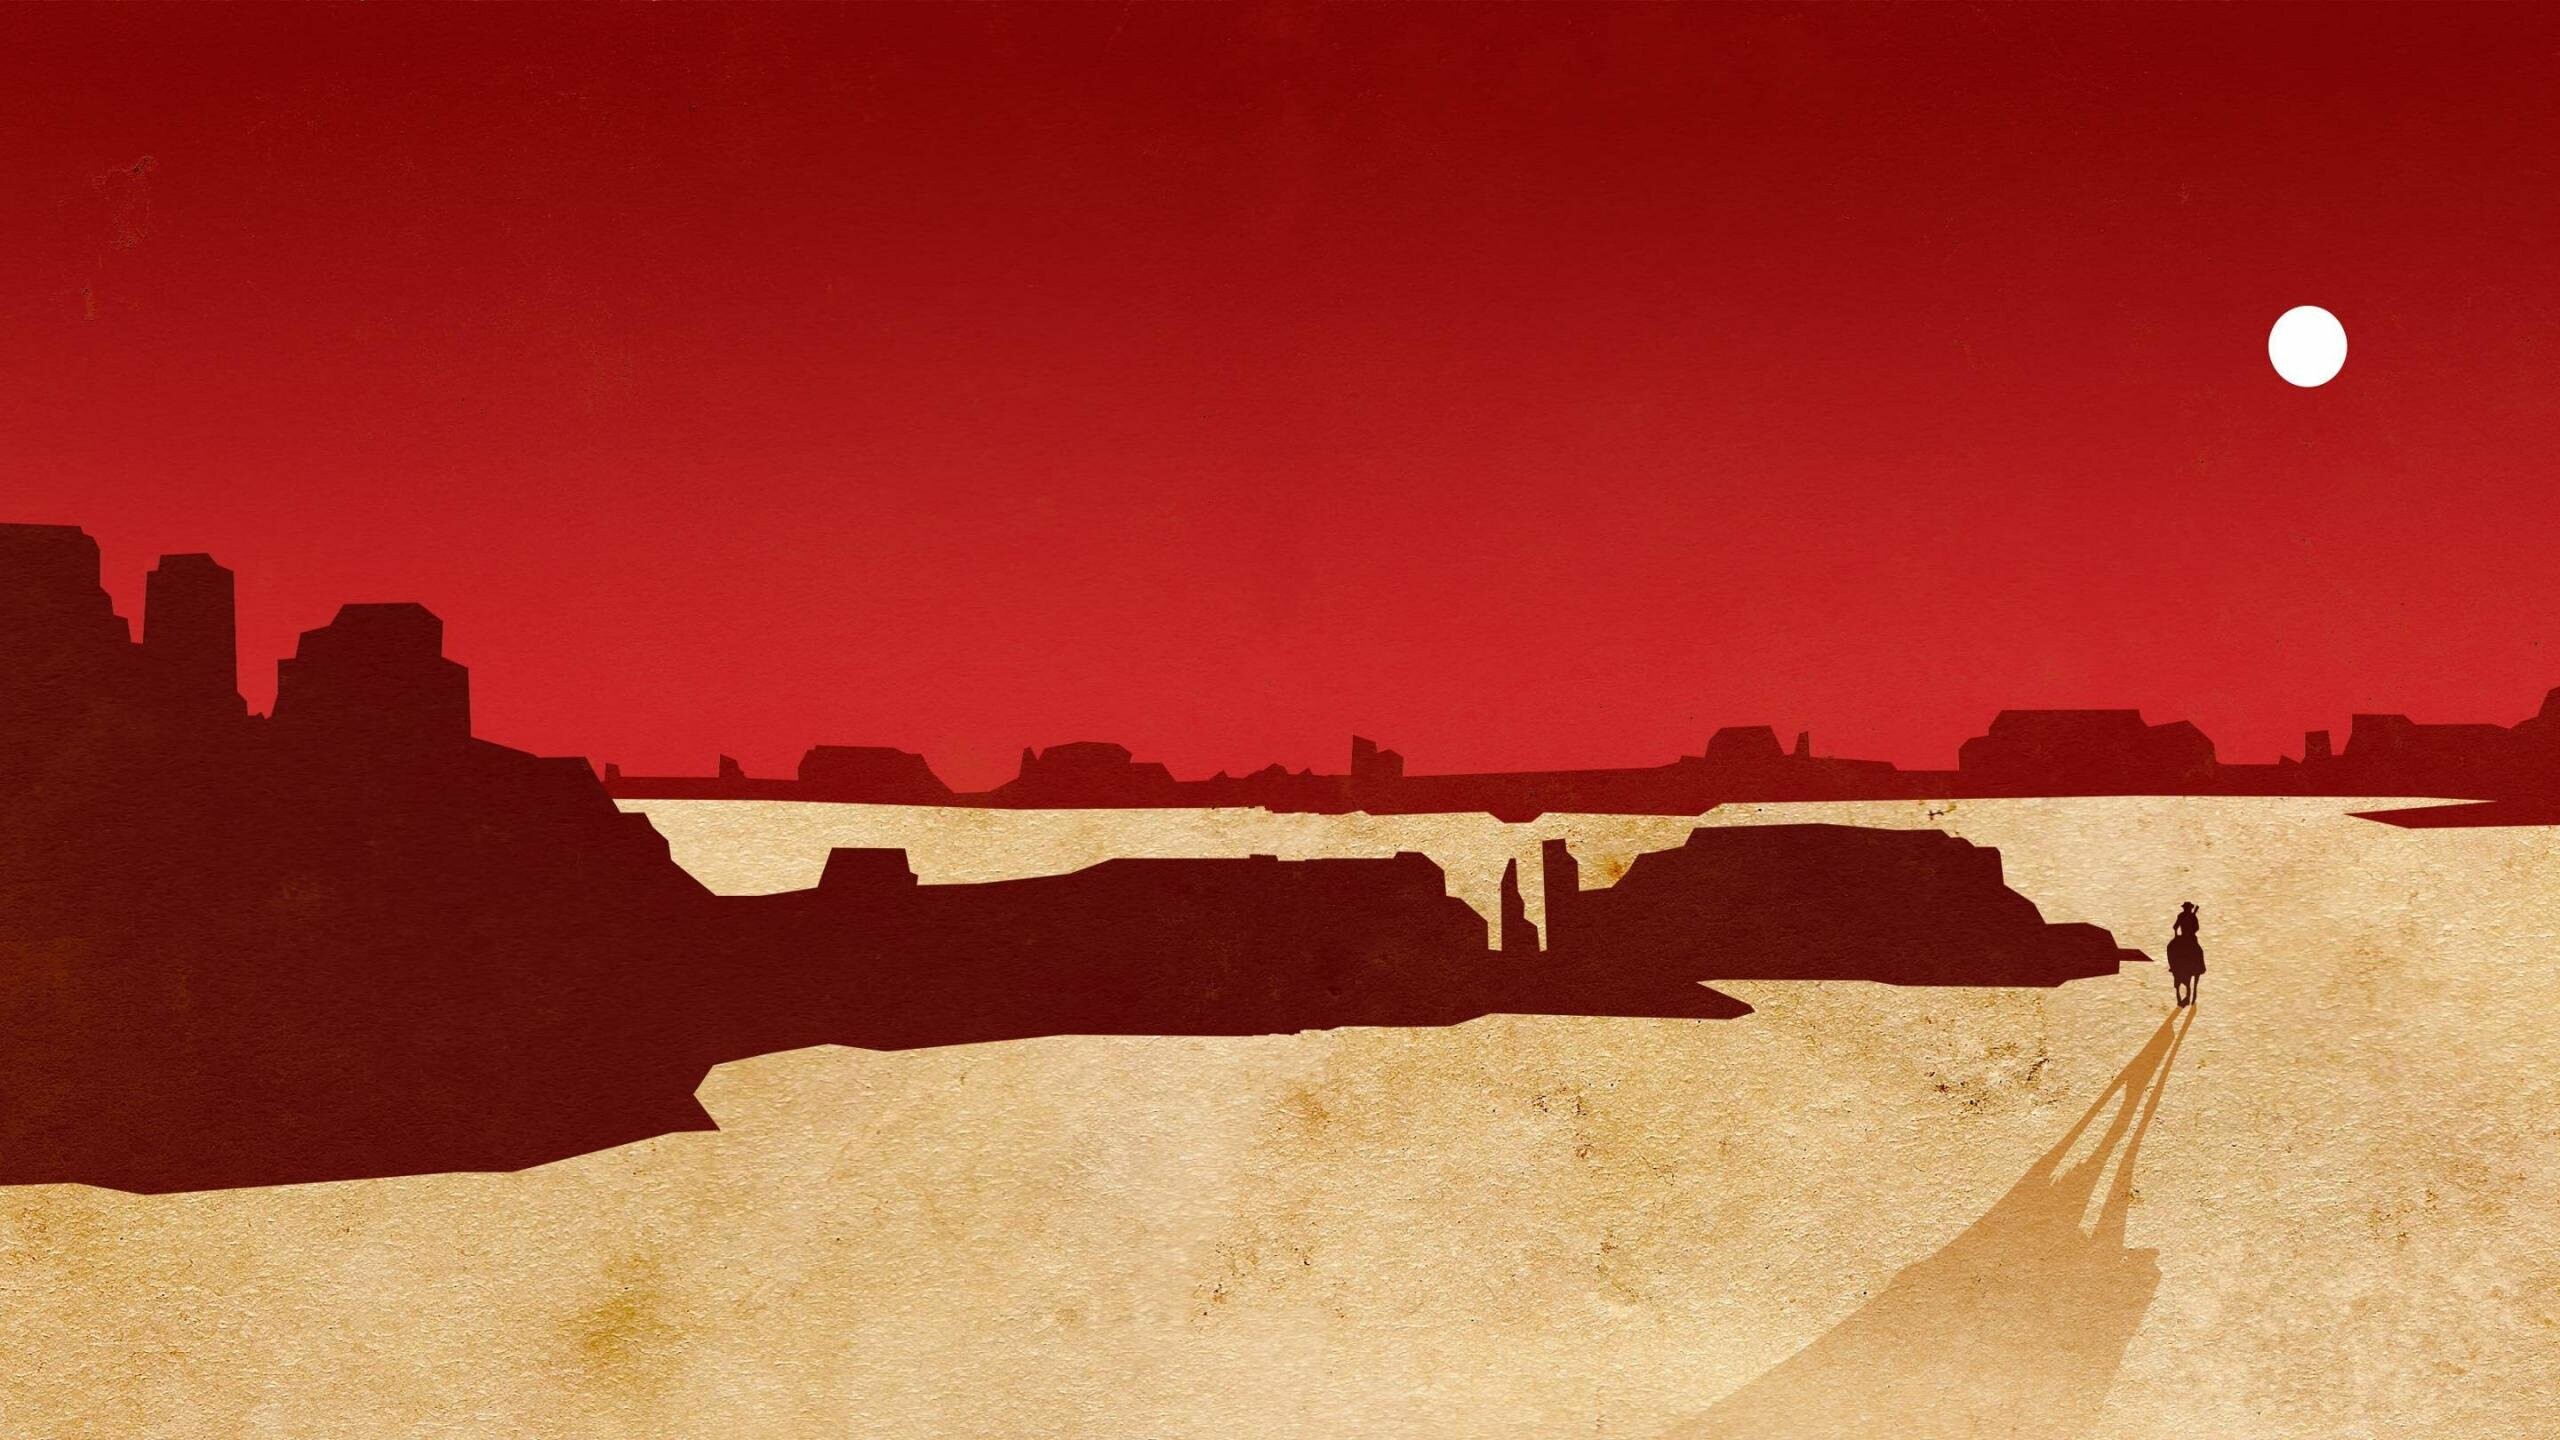 Red Dead Redemption: The game is set in 1911 and follows John Marston. 2560x1440 HD Background.